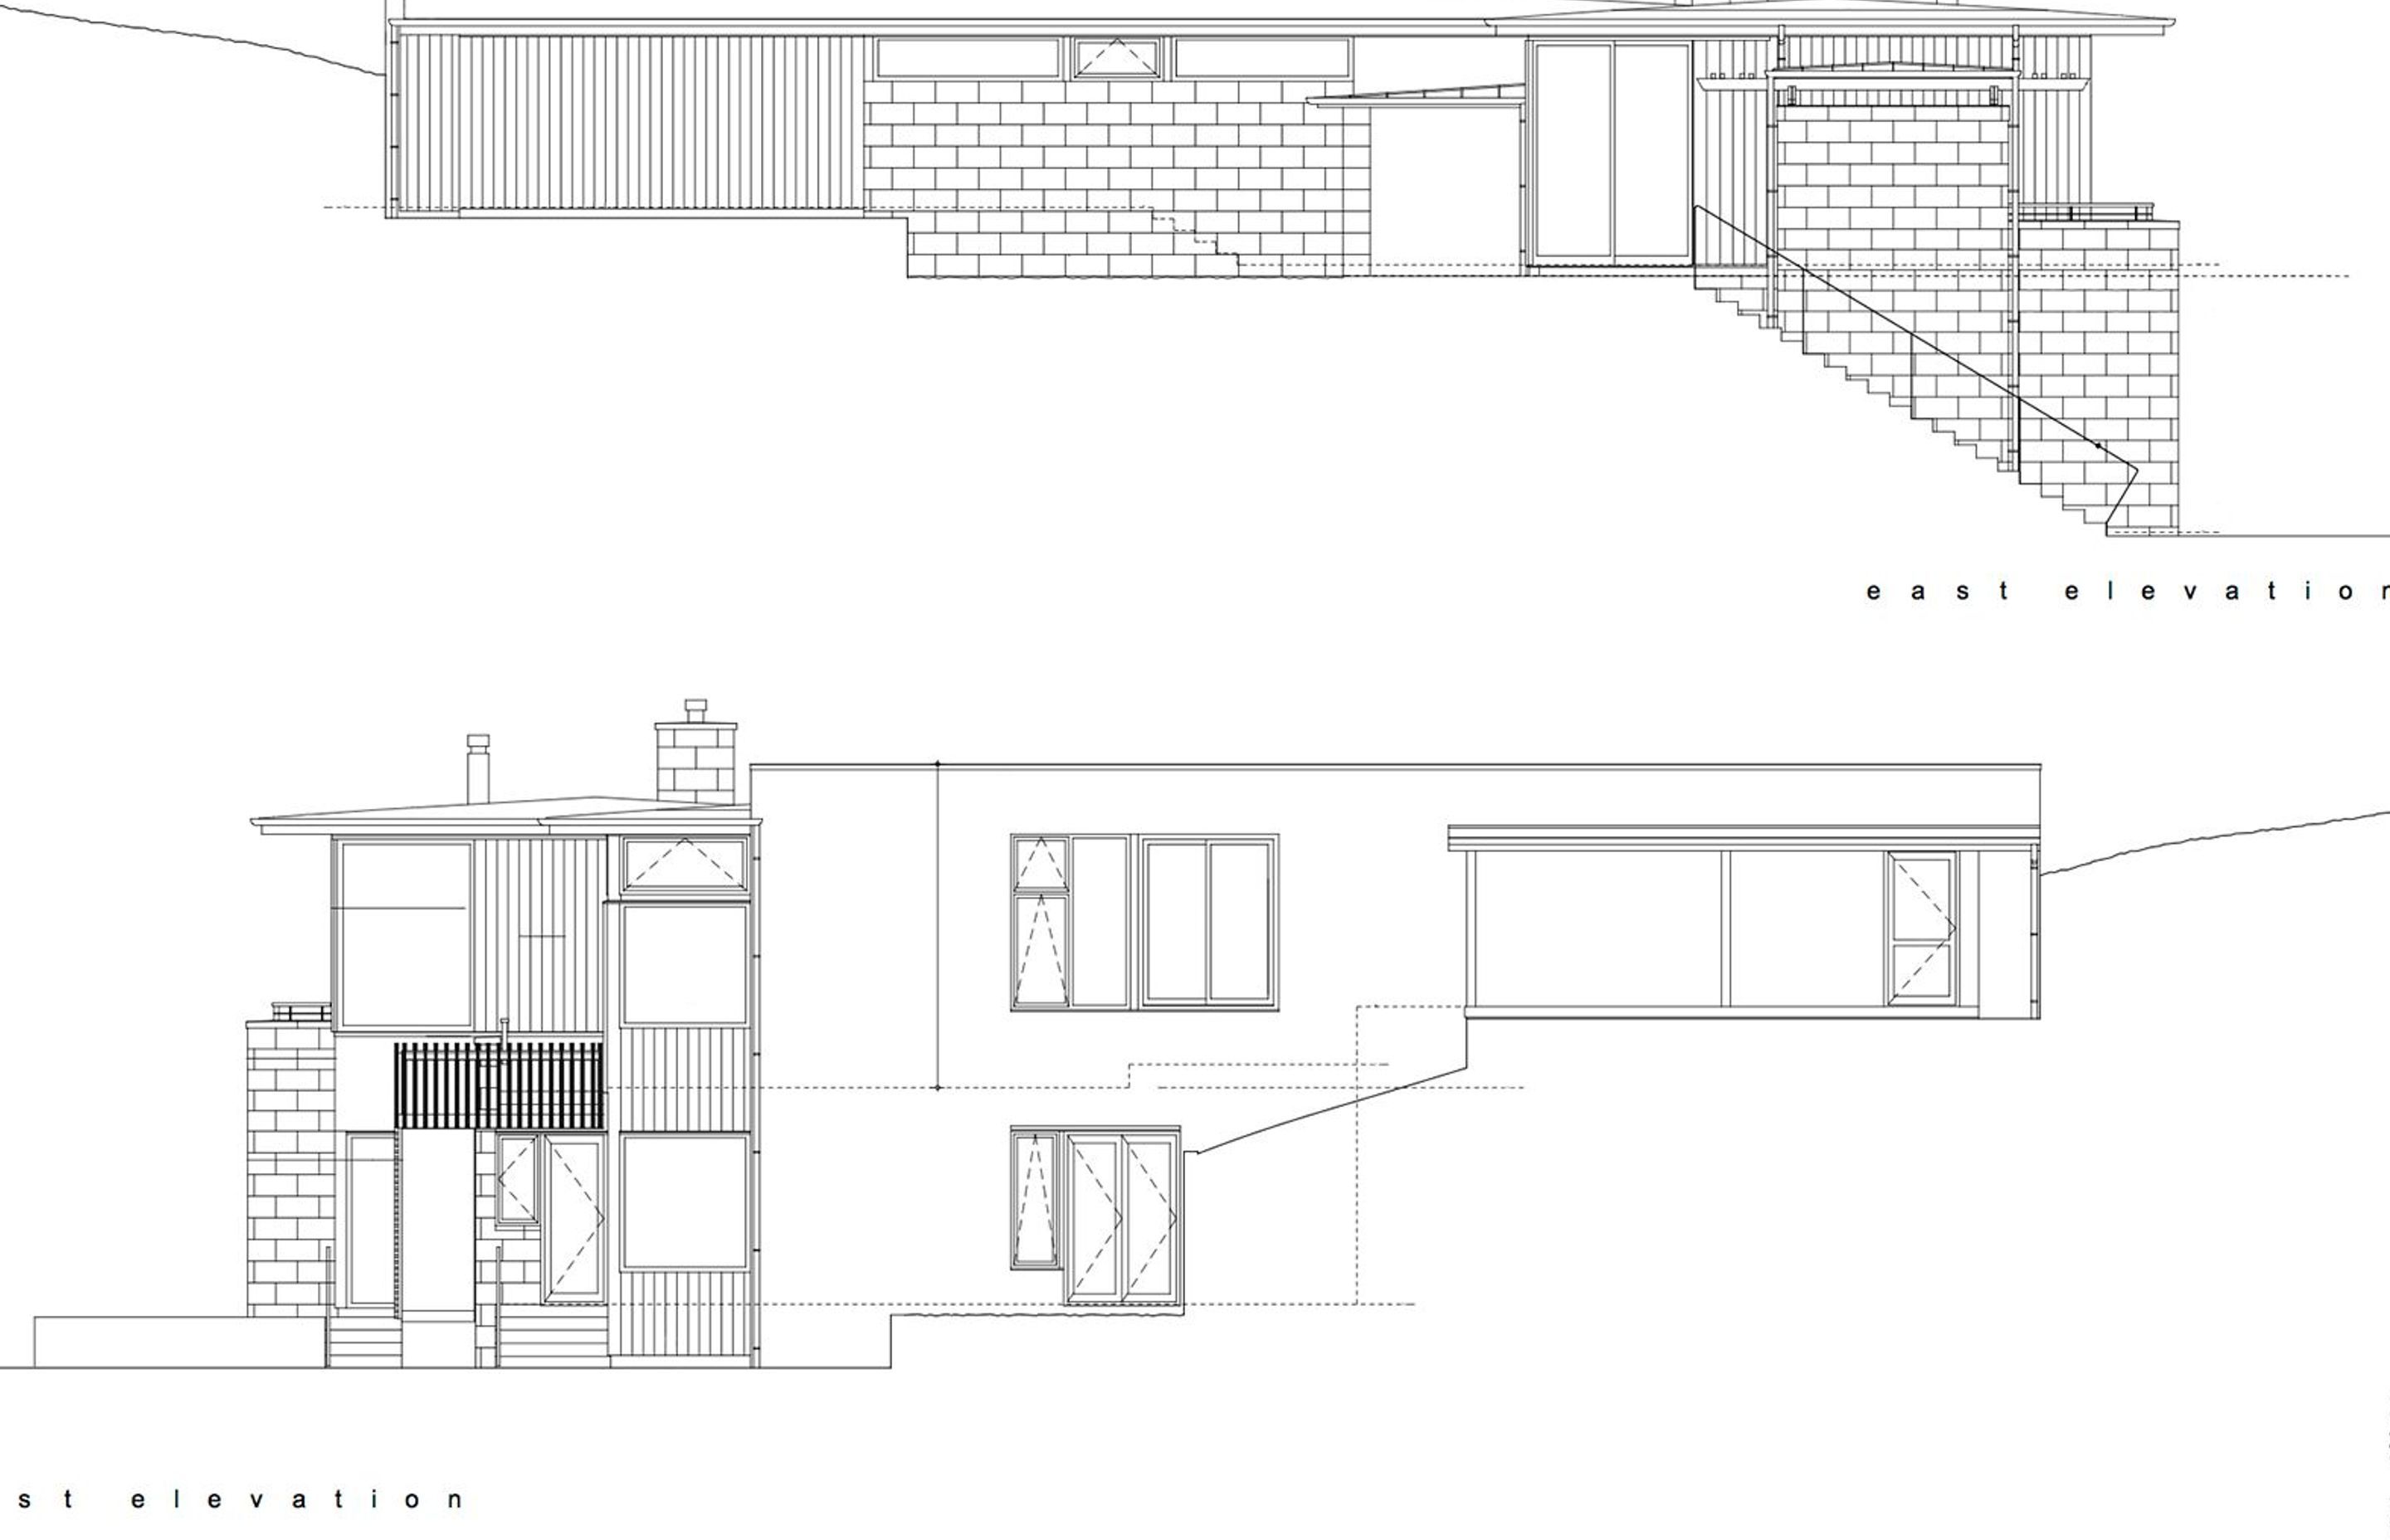 East and west elevations by Megan Edwards Architects.